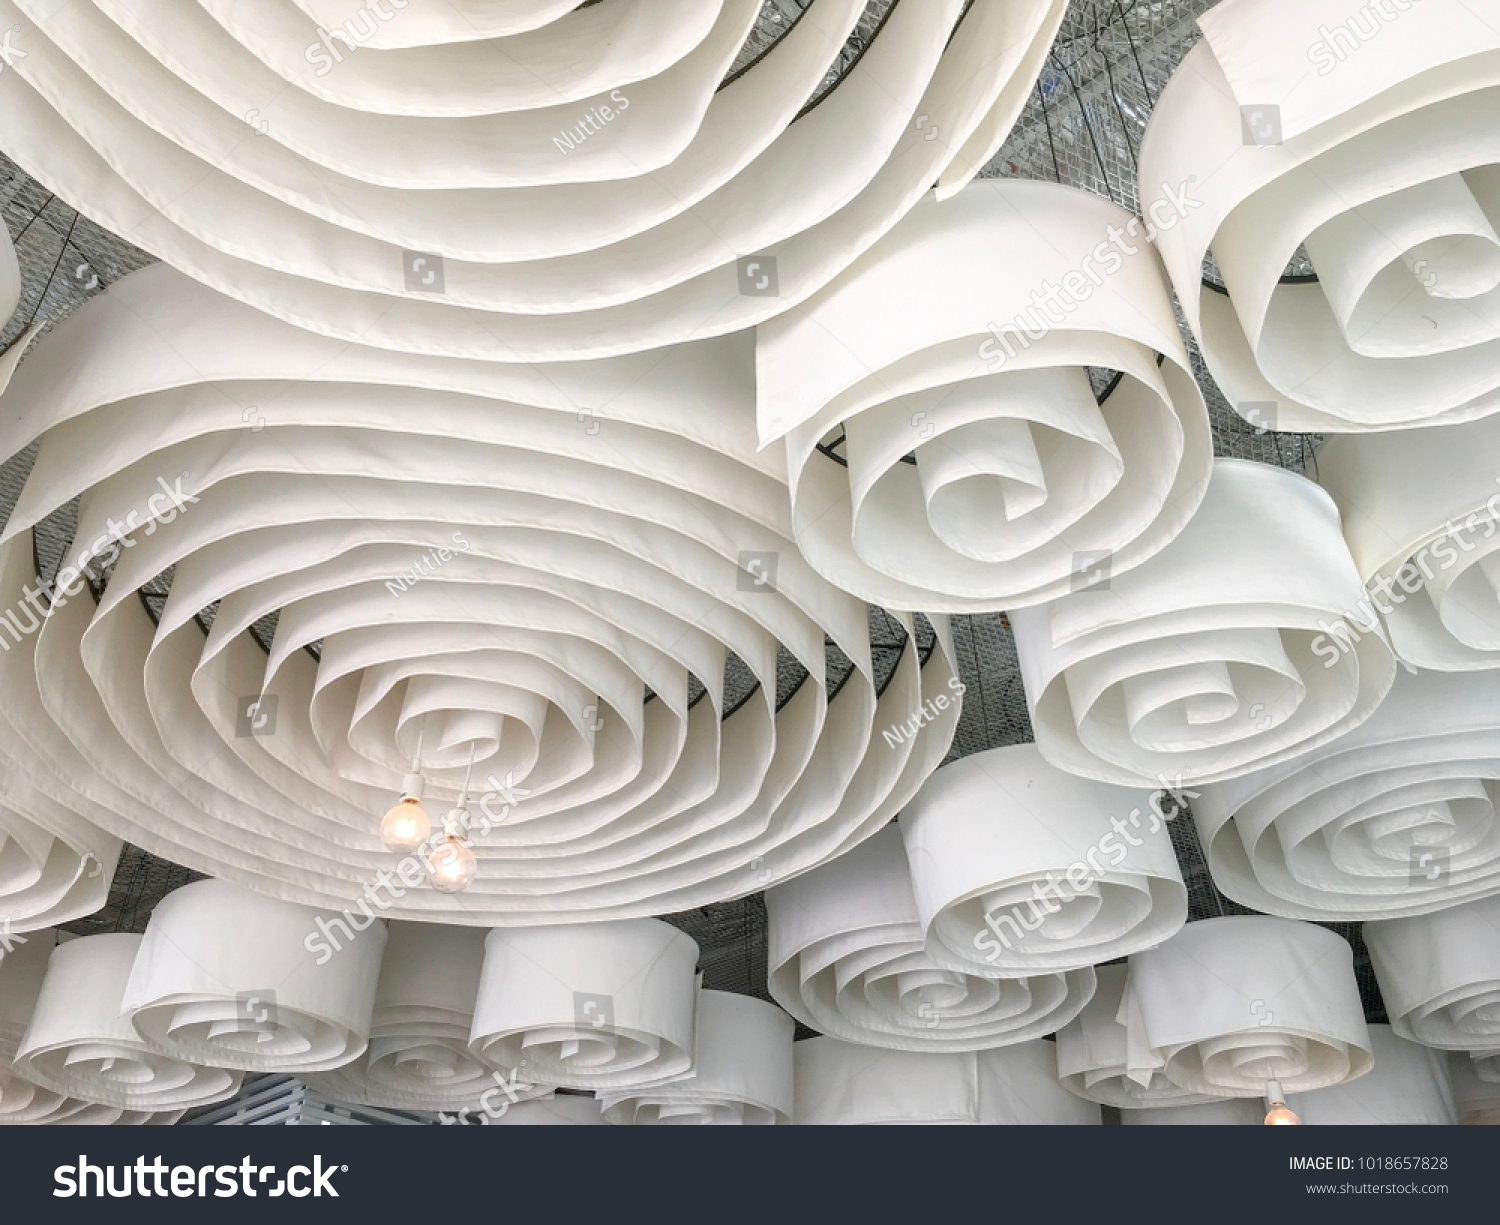 Lamp Many White Roll Fabric Hanging Stock Image Download Now